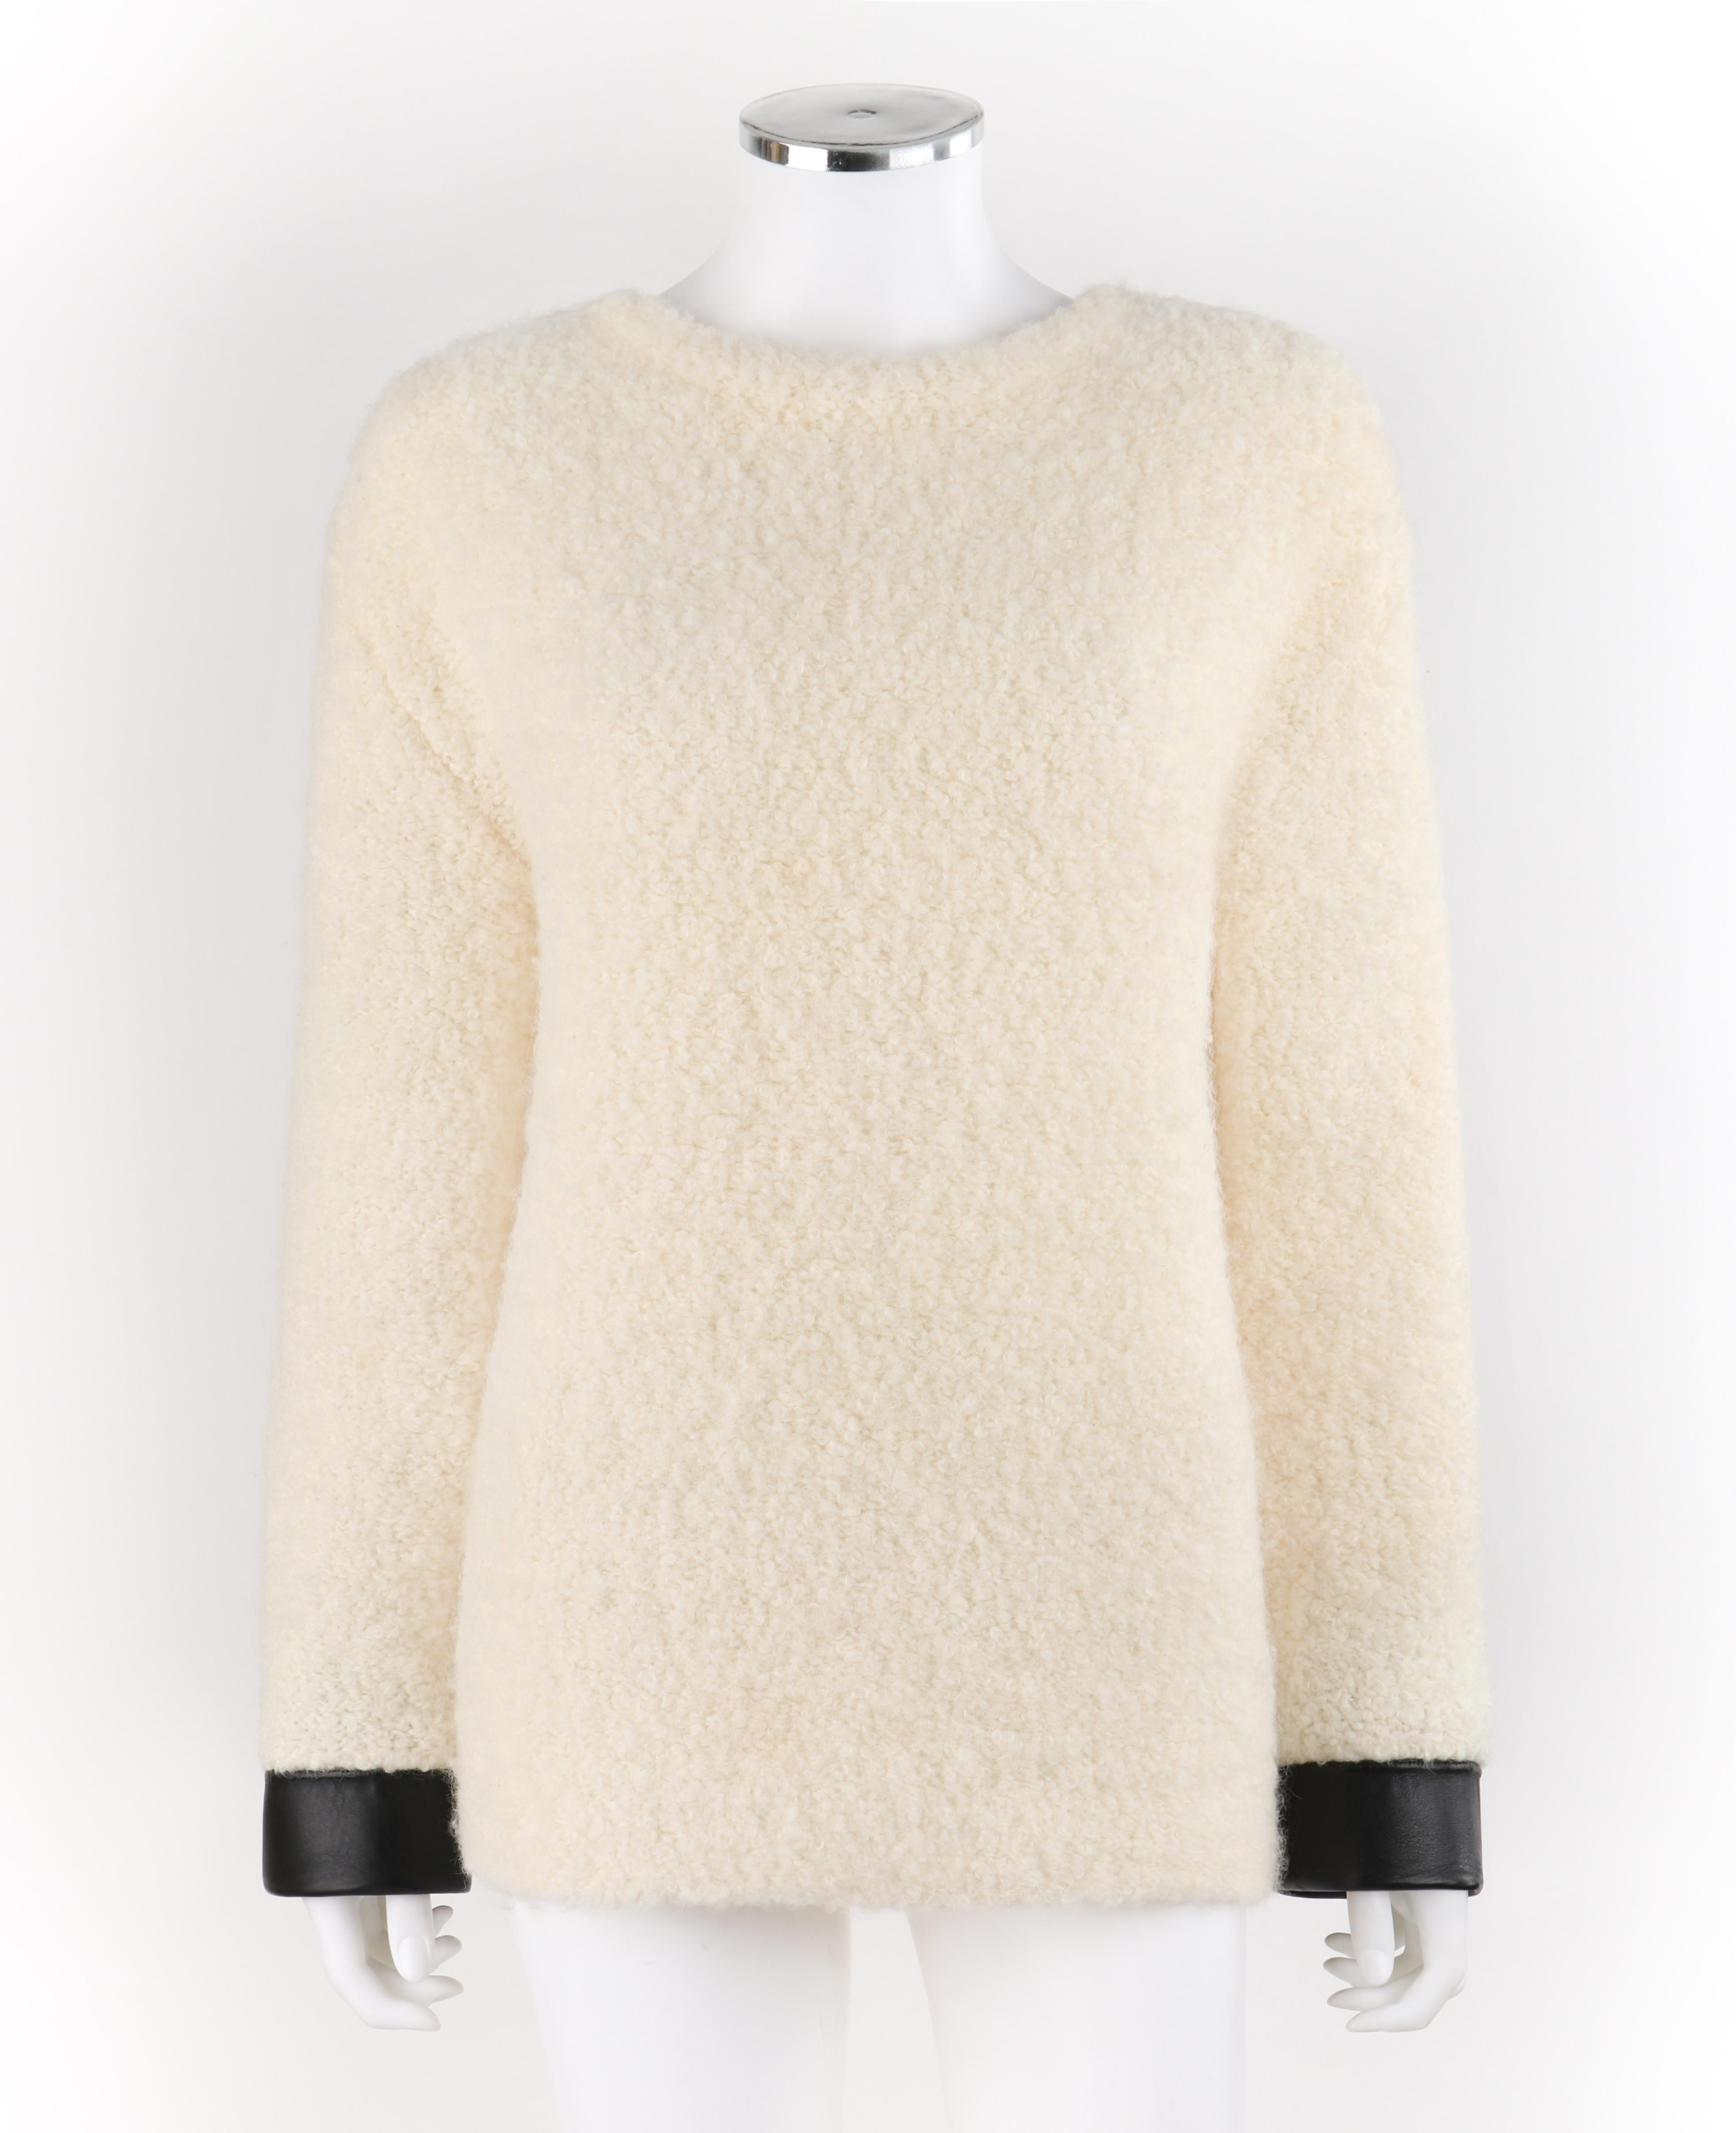 GUCCI Cream Boucle Alpaca Wool Knit Leather Cuffs Oversize Pullover Sweater
 
Estimated Retail: $1,630
 
Brand / Manufacturer: Gucci 
Style: Sweater
Color(s): Cream & Black 
Lined: No      
Marked Fabric Content: 61% Wool, 35% Alpaca, 4% Nylon